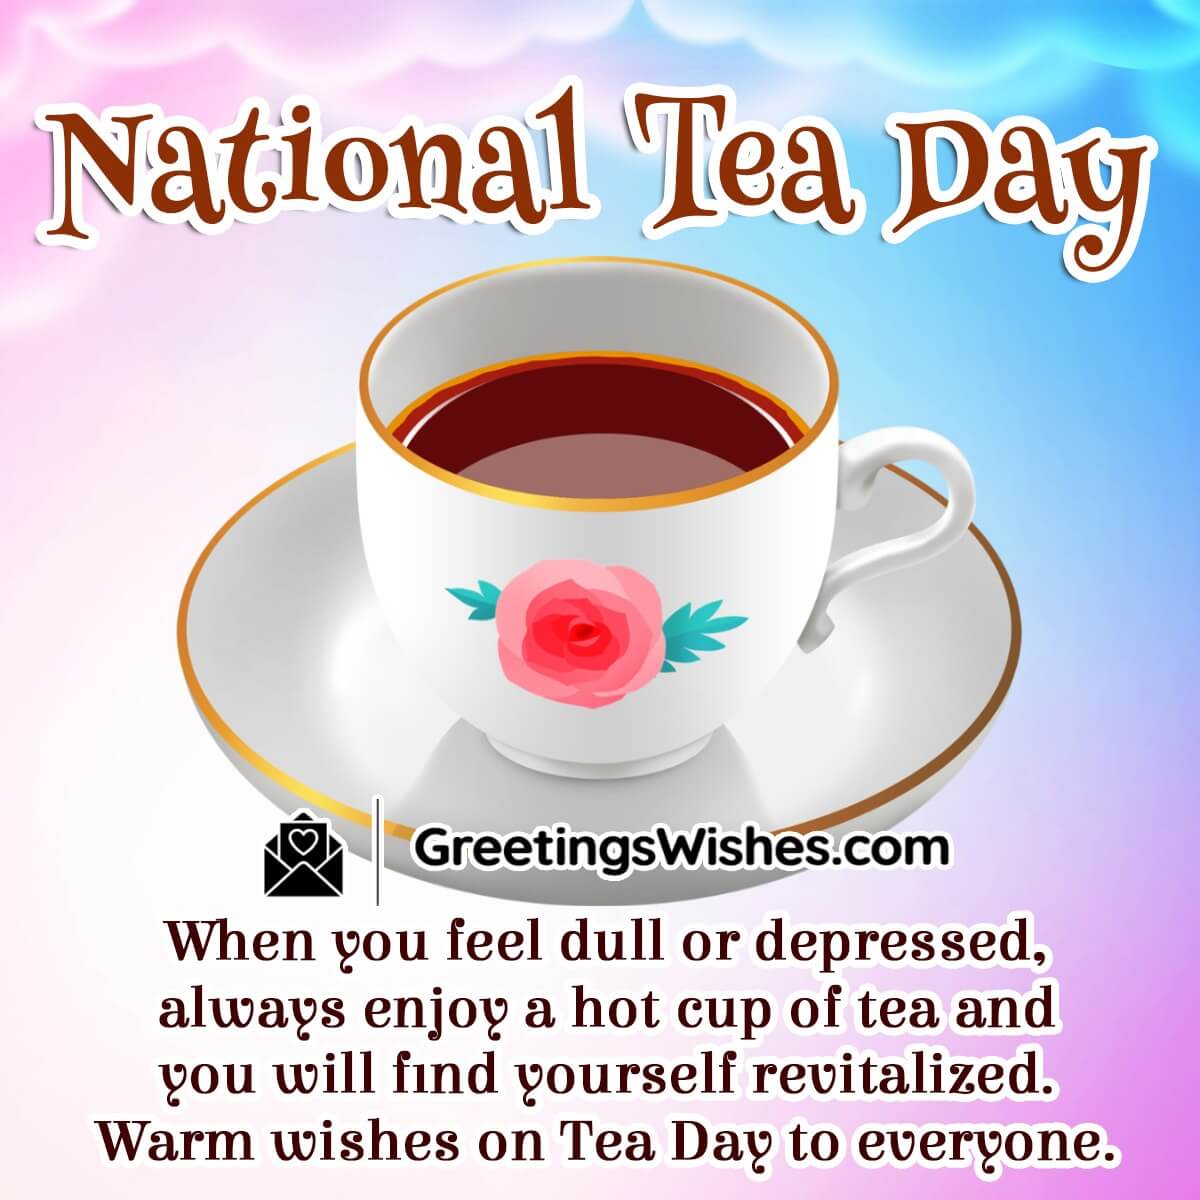 Wishes On National Tea Day